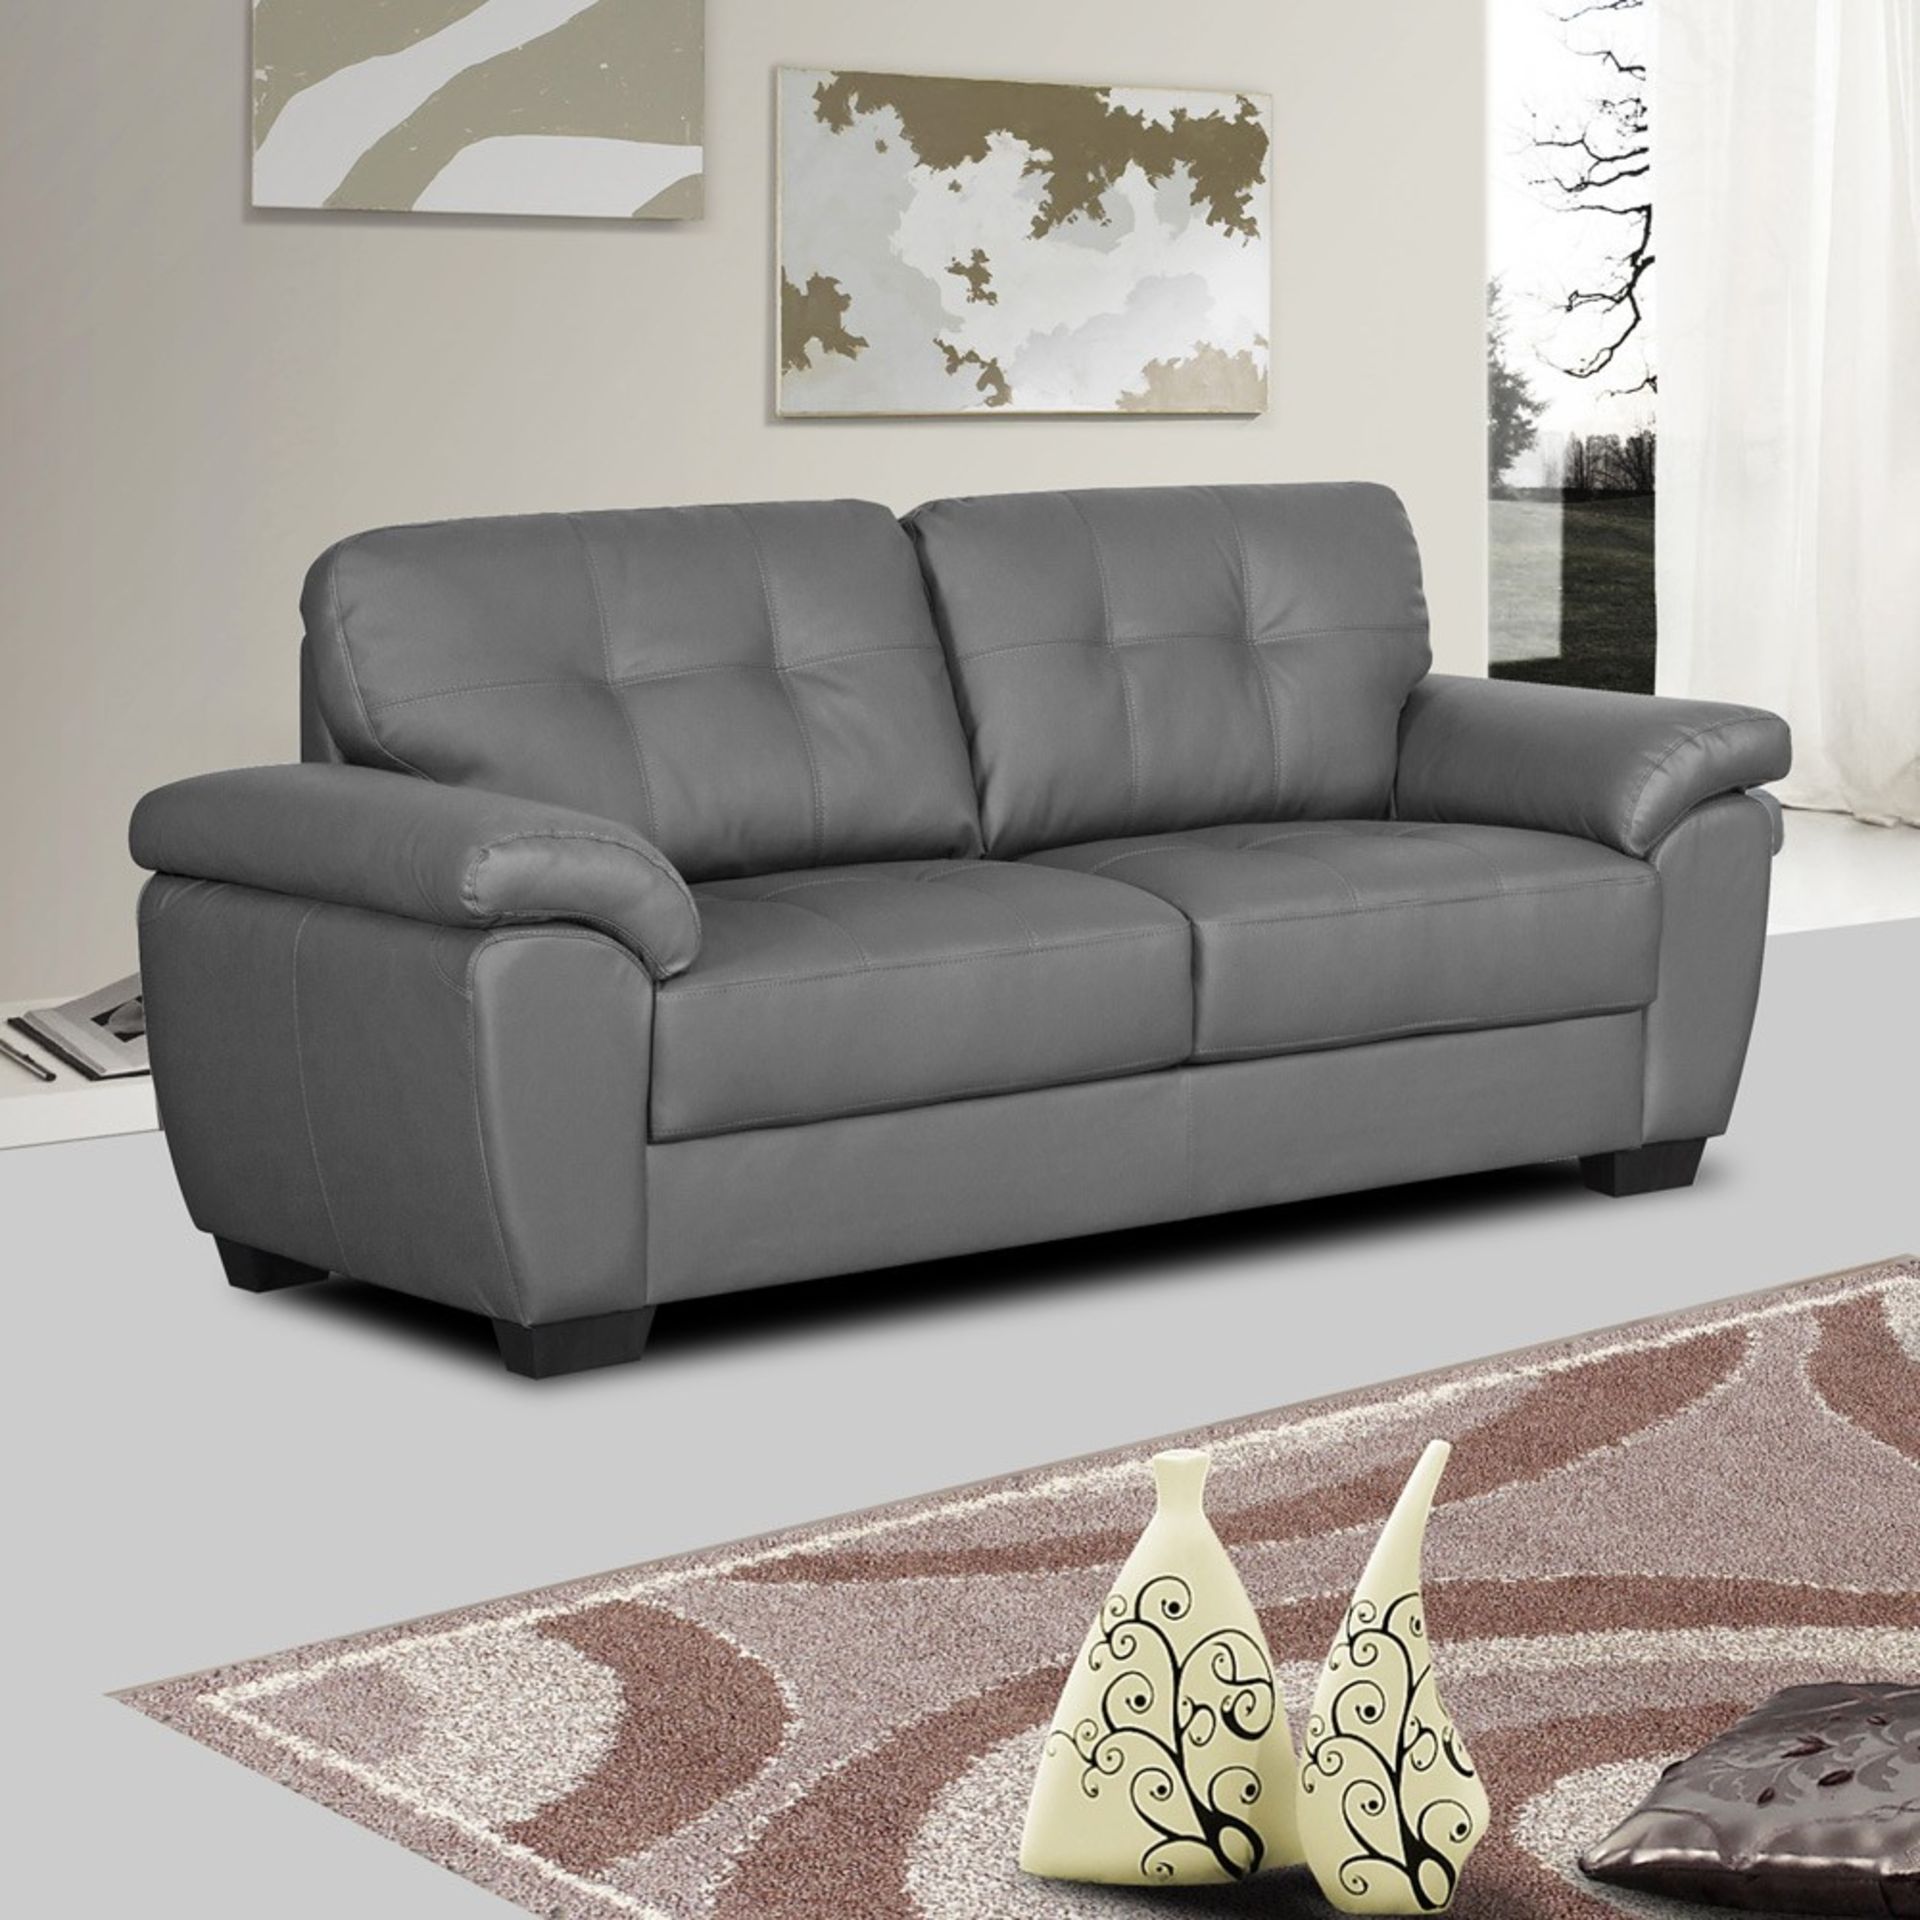 Brand New Boxed Sammi 3 Seater Sofa Plus 2 Matching Arm Chairs In Gun Metal Grey - Image 2 of 2